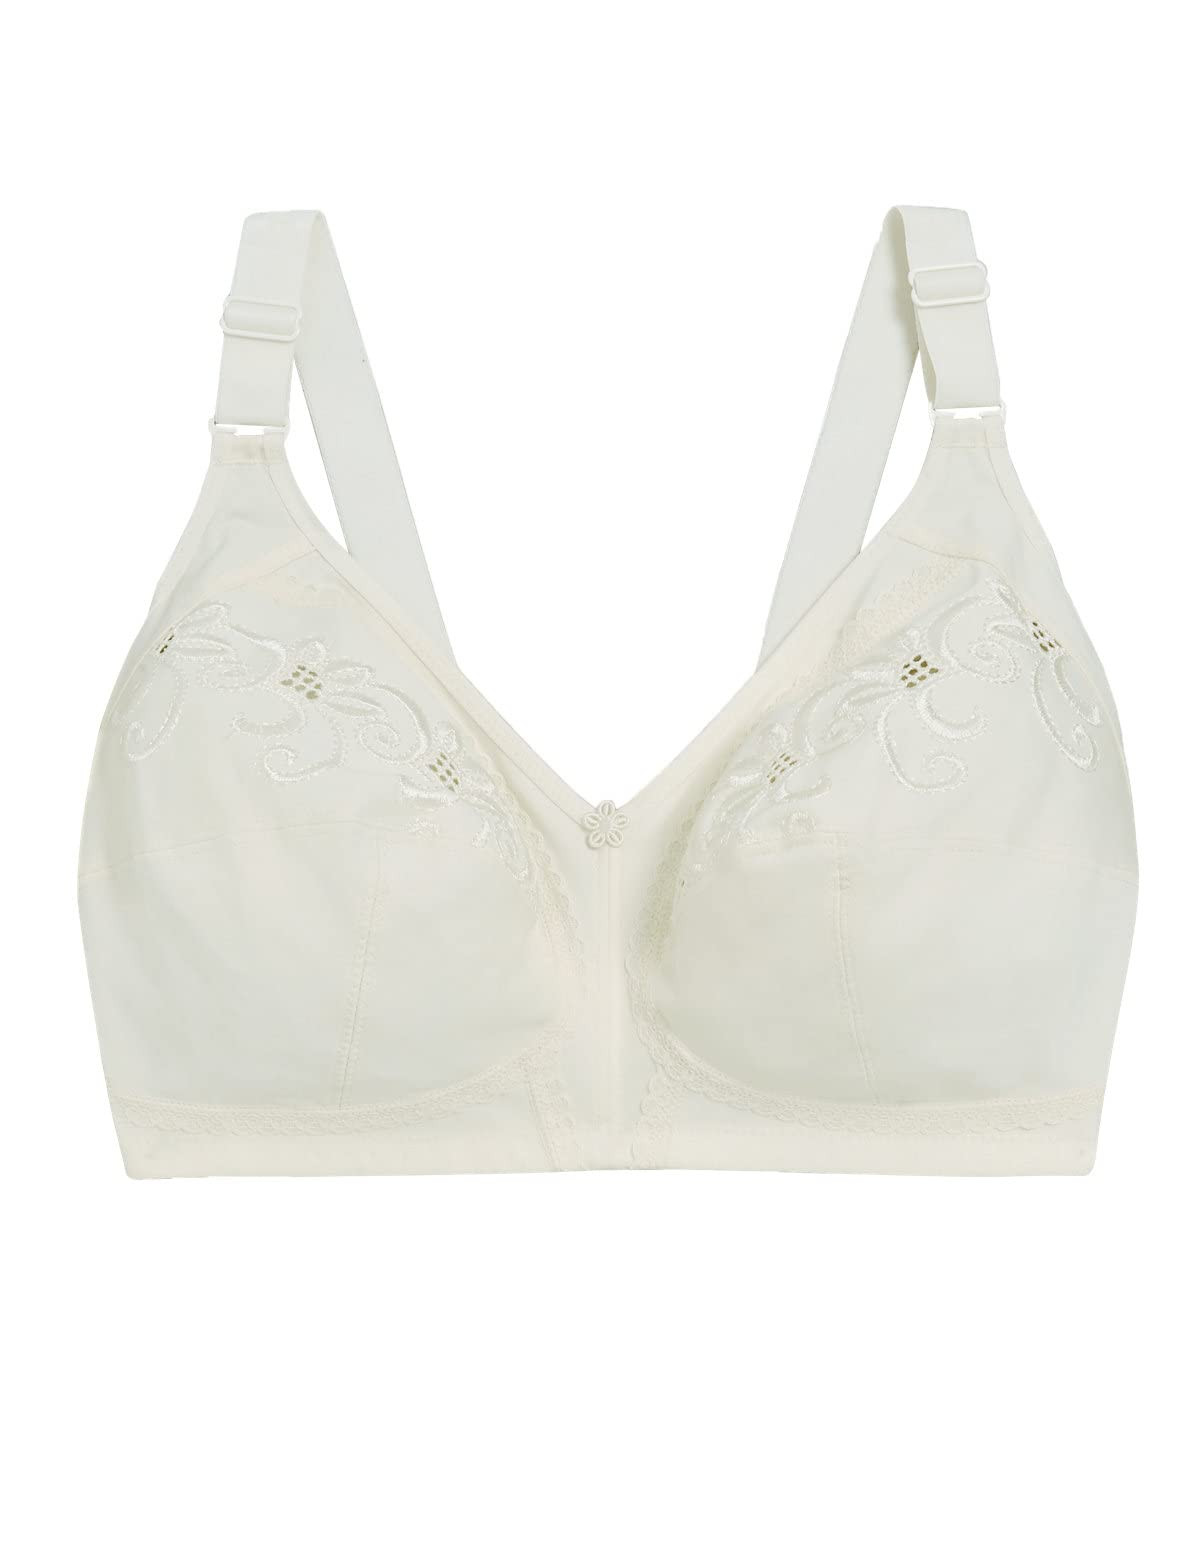 https://www.fastemi.com/uploads/fastemicom/products/marks-amp-spencer-womens-cotton-blend-non-padded-non-wired-full-cup-bra-40csize-40c-253948621067792_l.jpg